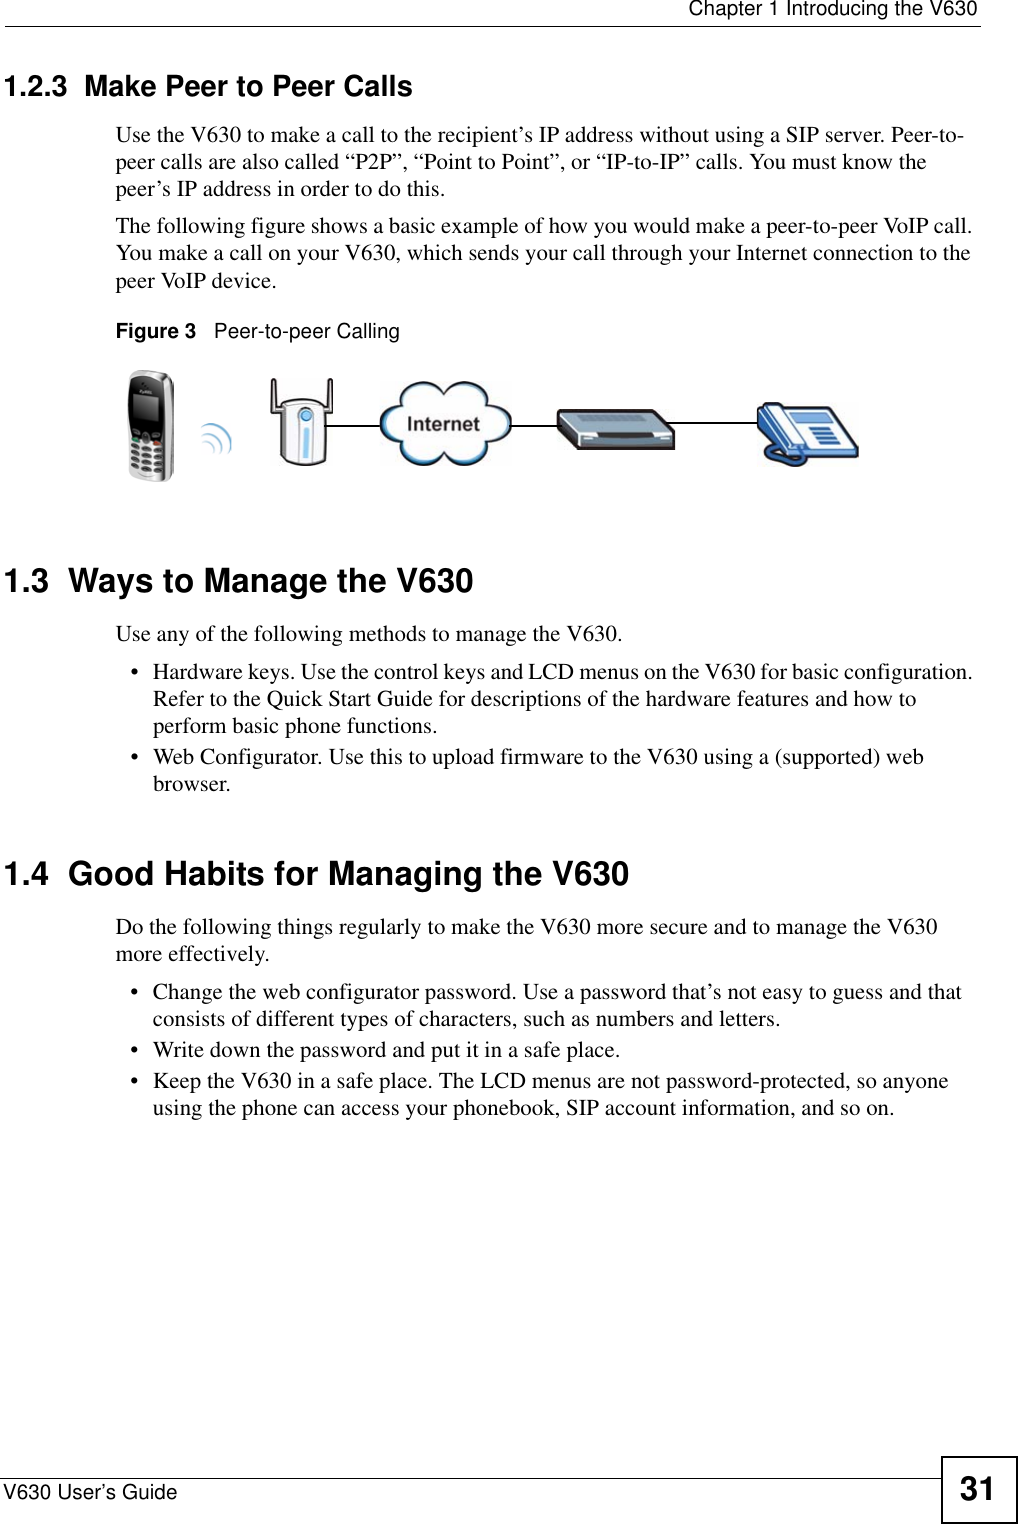  Chapter 1 Introducing the V630V630 User’s Guide 311.2.3  Make Peer to Peer CallsUse the V630 to make a call to the recipient’s IP address without using a SIP server. Peer-to-peer calls are also called “P2P”, “Point to Point”, or “IP-to-IP” calls. You must know the peer’s IP address in order to do this.The following figure shows a basic example of how you would make a peer-to-peer VoIP call. You make a call on your V630, which sends your call through your Internet connection to the peer VoIP device.Figure 3   Peer-to-peer Calling1.3  Ways to Manage the V630Use any of the following methods to manage the V630.• Hardware keys. Use the control keys and LCD menus on the V630 for basic configuration. Refer to the Quick Start Guide for descriptions of the hardware features and how to perform basic phone functions. • Web Configurator. Use this to upload firmware to the V630 using a (supported) web browser. 1.4  Good Habits for Managing the V630Do the following things regularly to make the V630 more secure and to manage the V630 more effectively.• Change the web configurator password. Use a password that’s not easy to guess and that consists of different types of characters, such as numbers and letters.• Write down the password and put it in a safe place.• Keep the V630 in a safe place. The LCD menus are not password-protected, so anyone using the phone can access your phonebook, SIP account information, and so on.